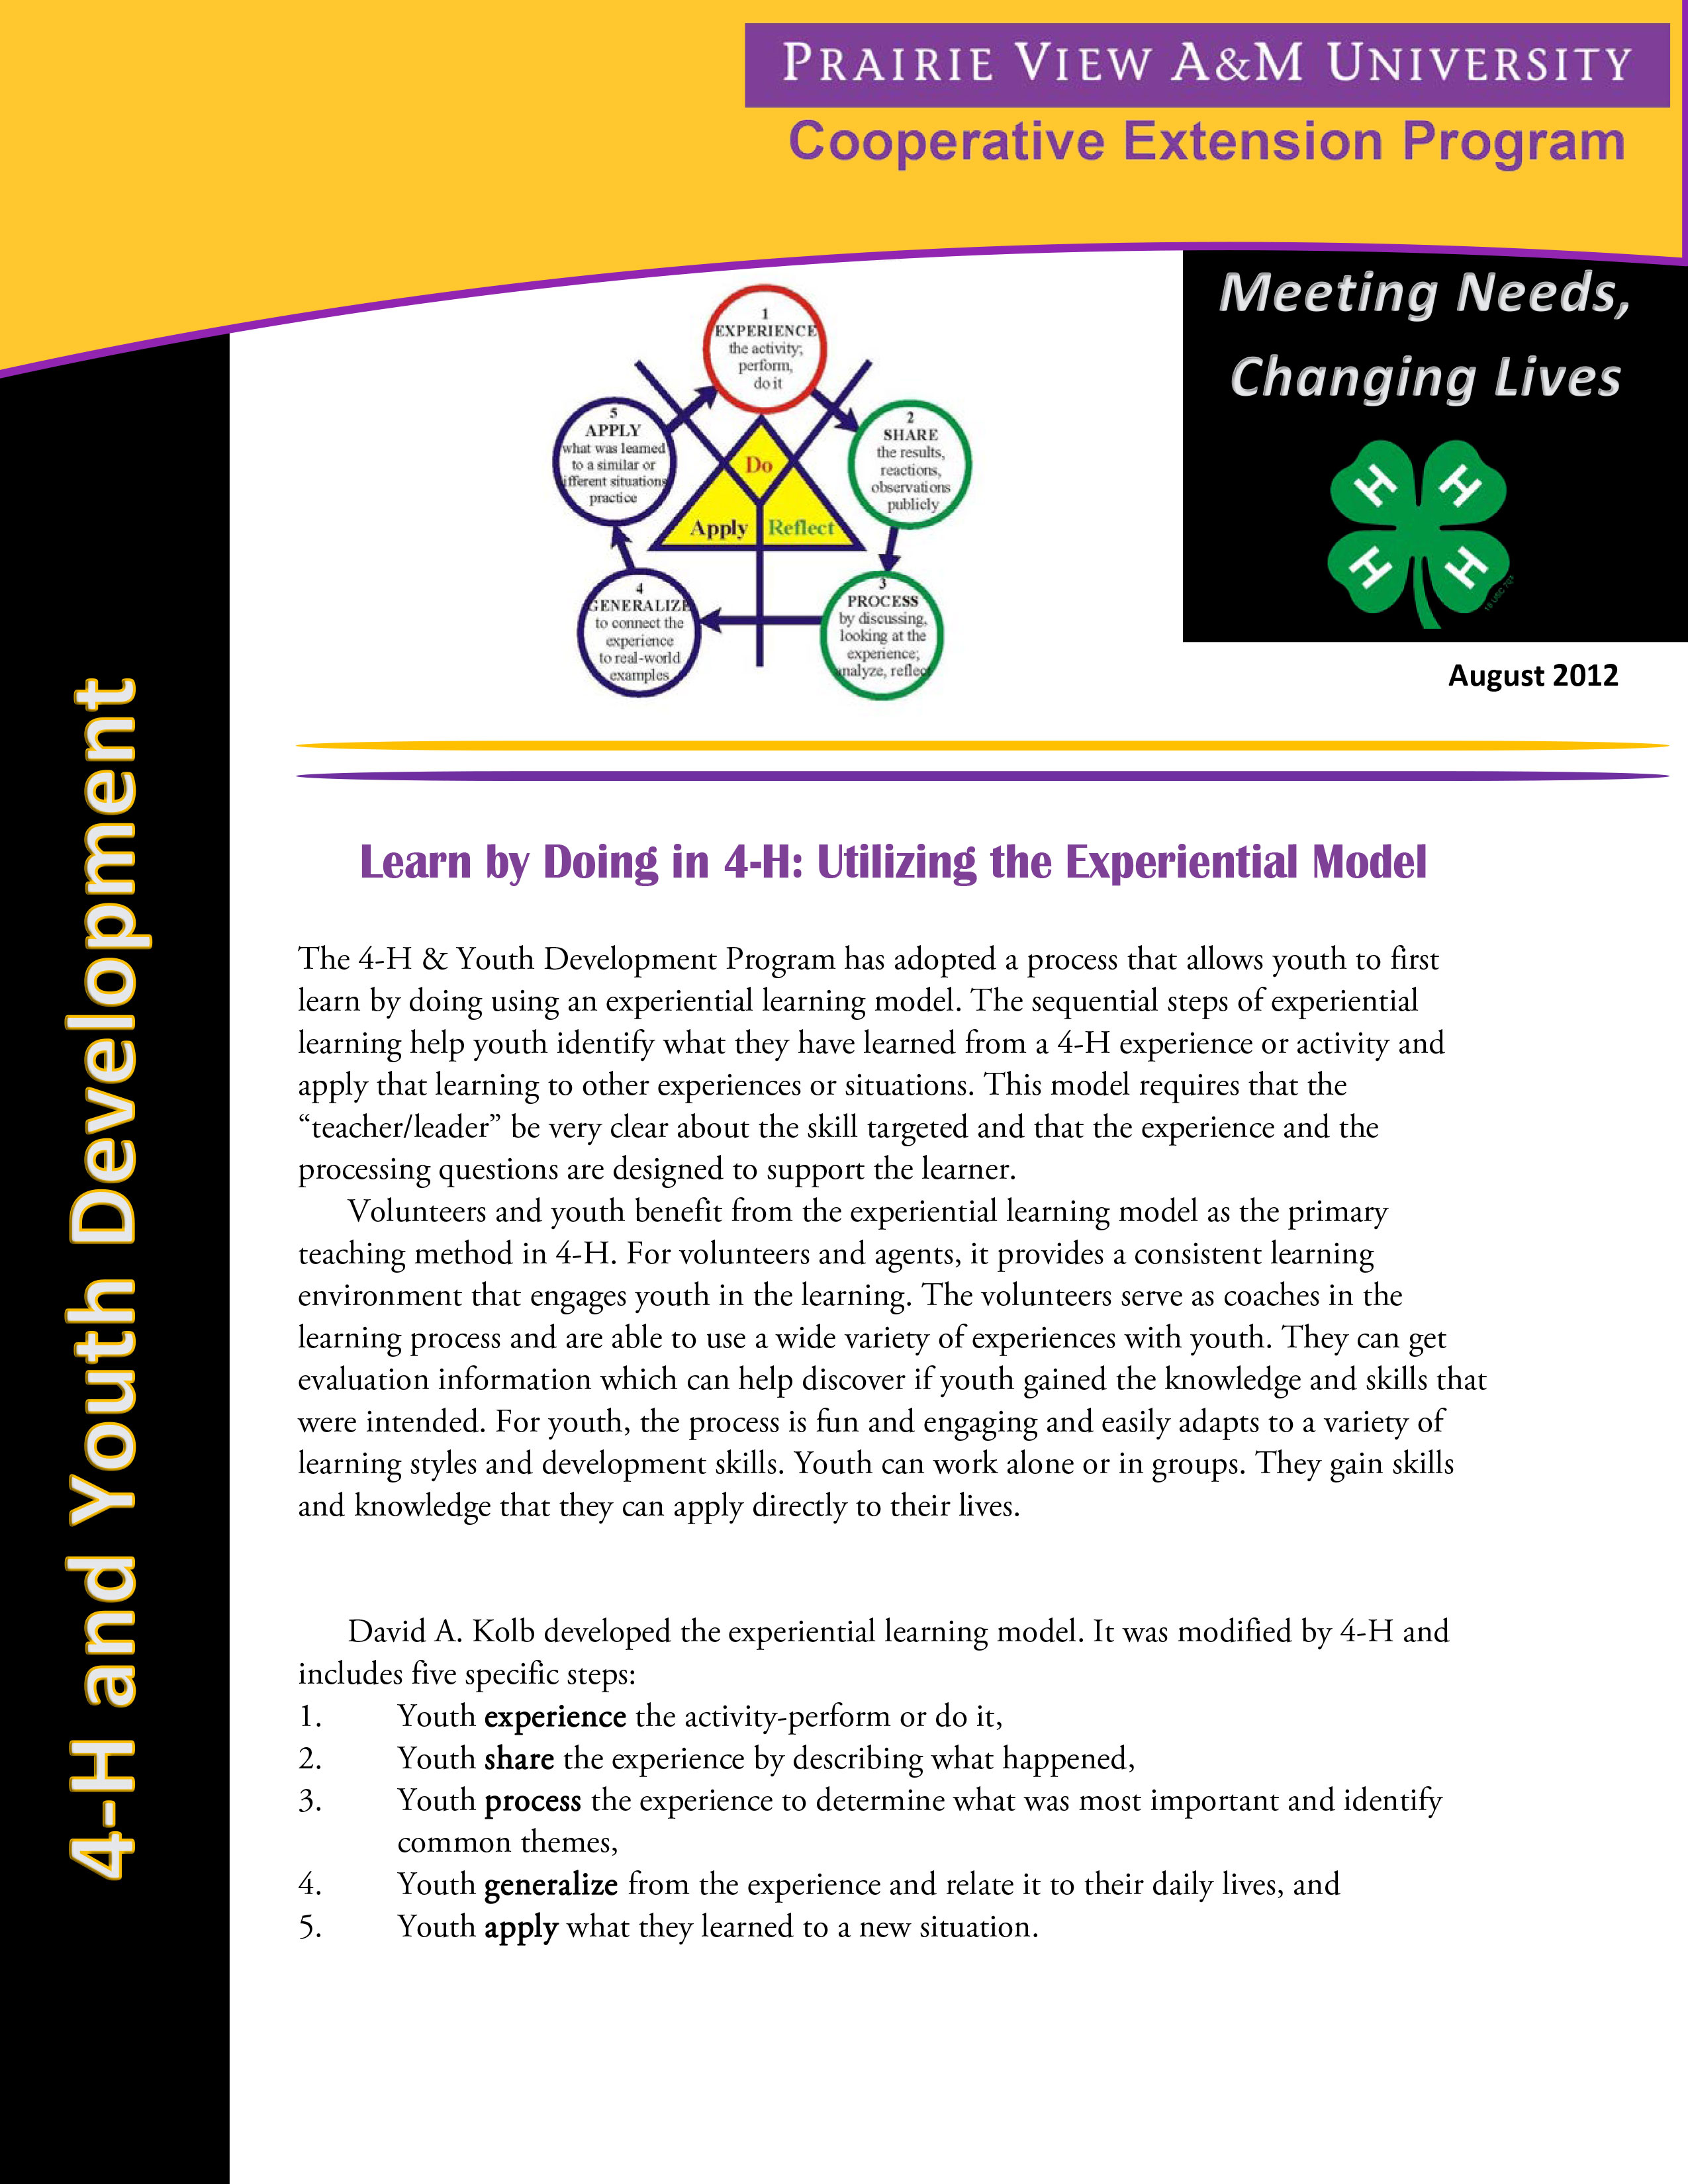 Learning By Doing in 4-H: Utilizing the Experiential Model